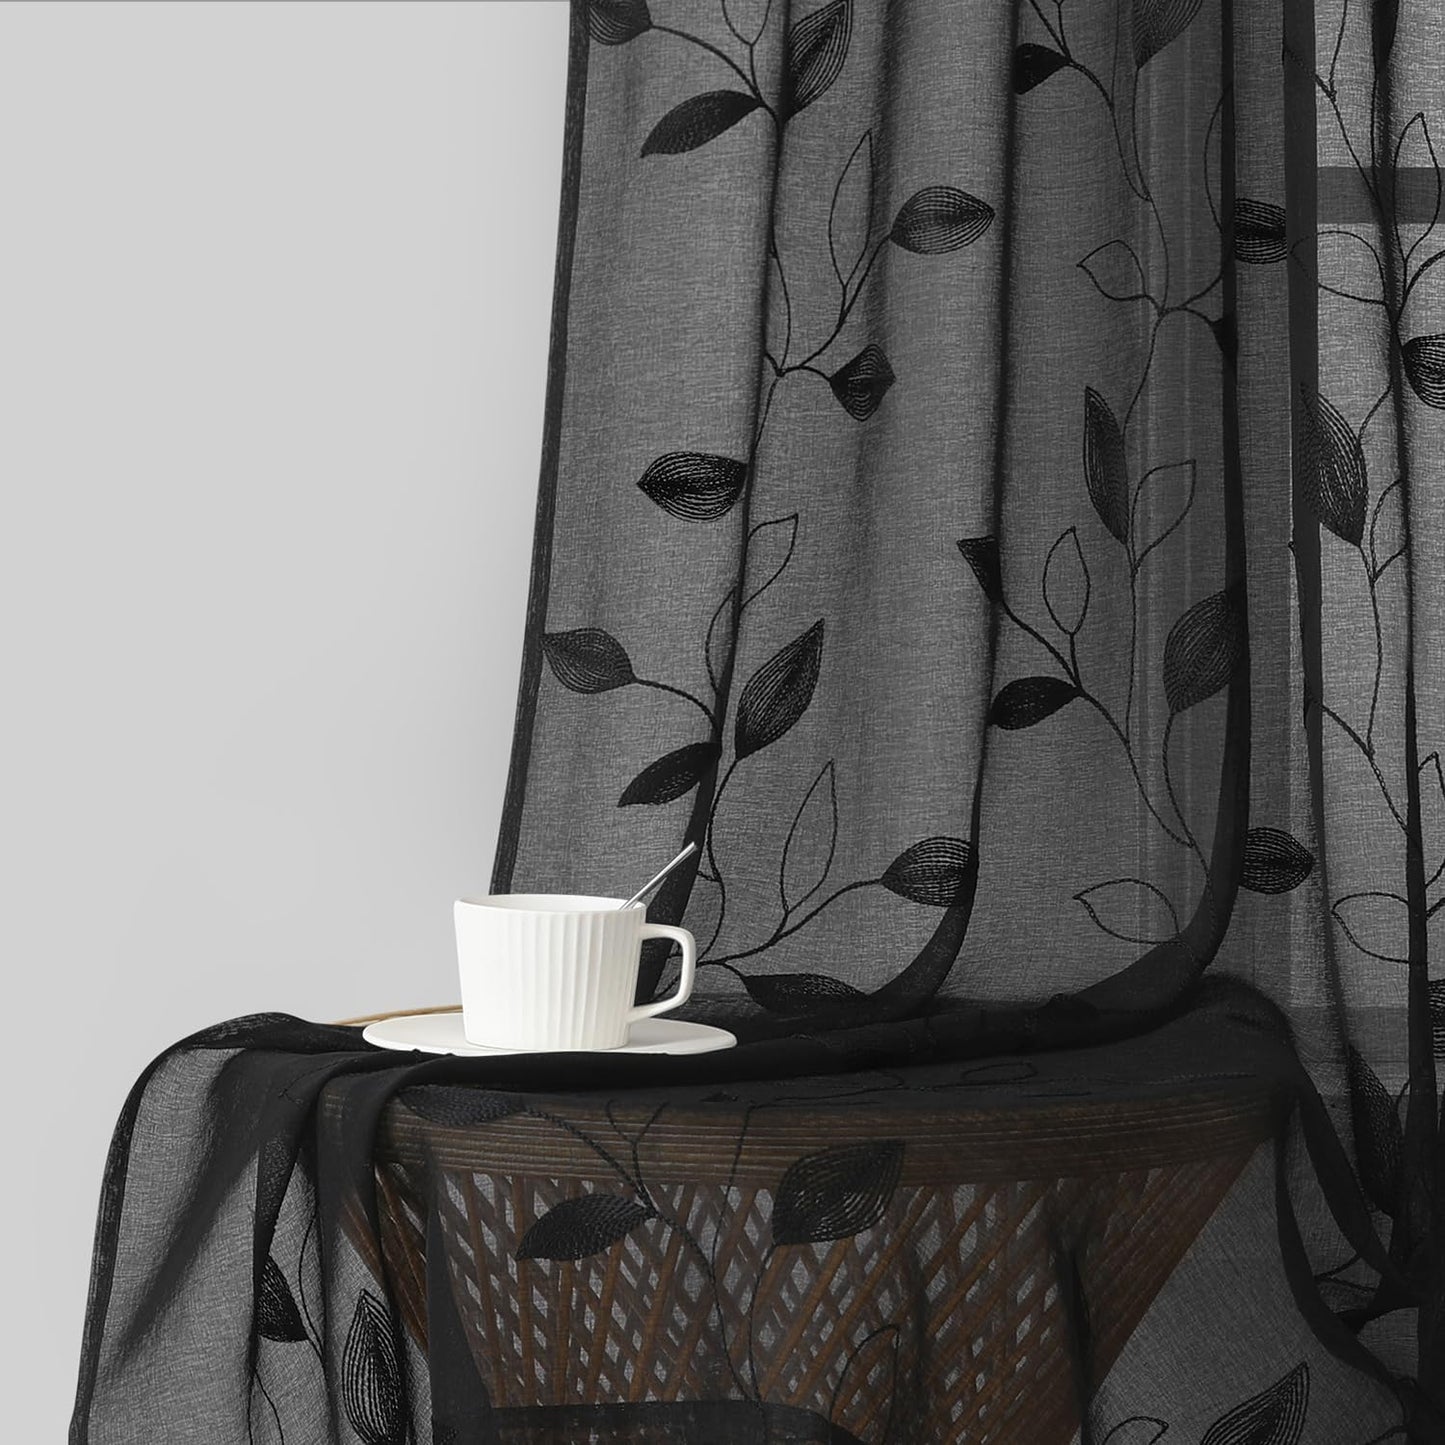 HOMEIDEAS Sage Green Sheer Curtains 52 X 63 Inches Length 2 Panels Embroidered Leaf Pattern Pocket Faux Linen Floral Semi Sheer Voile Window Curtains/Drapes for Bedroom Living Room  HOMEIDEAS Black W52" X L96" 